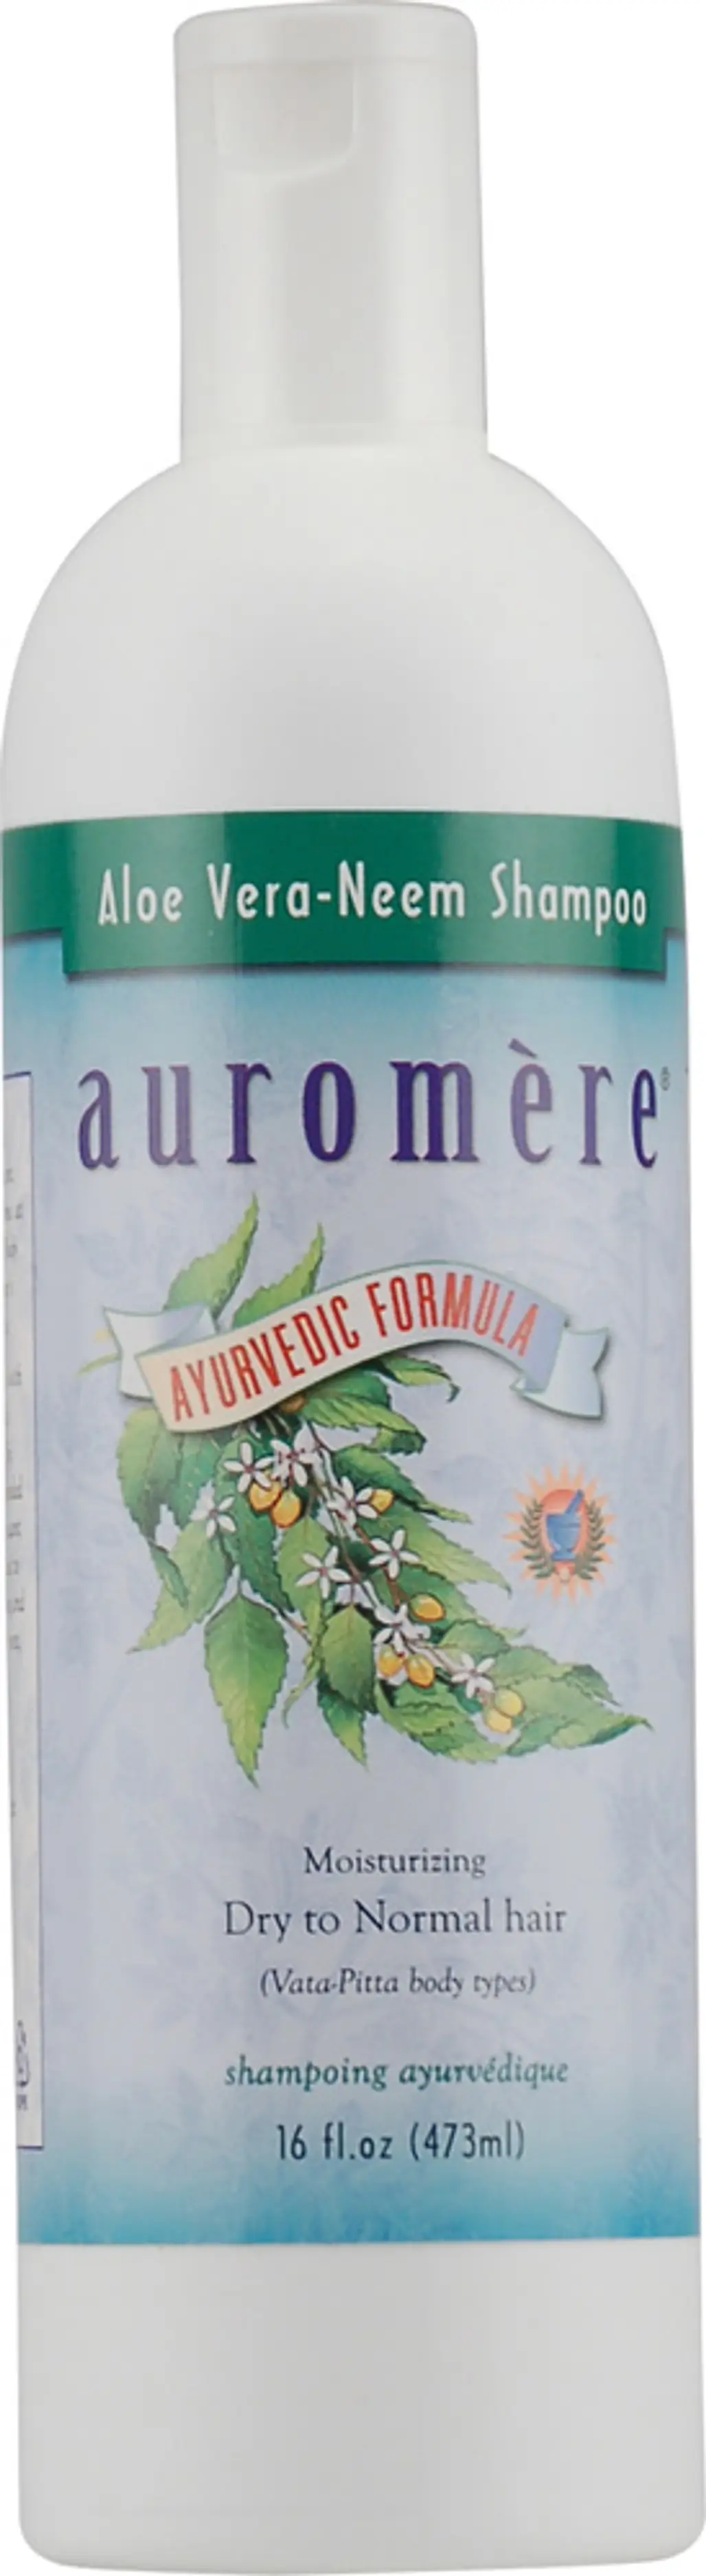 Ayurvedic Hair Care by Auromere